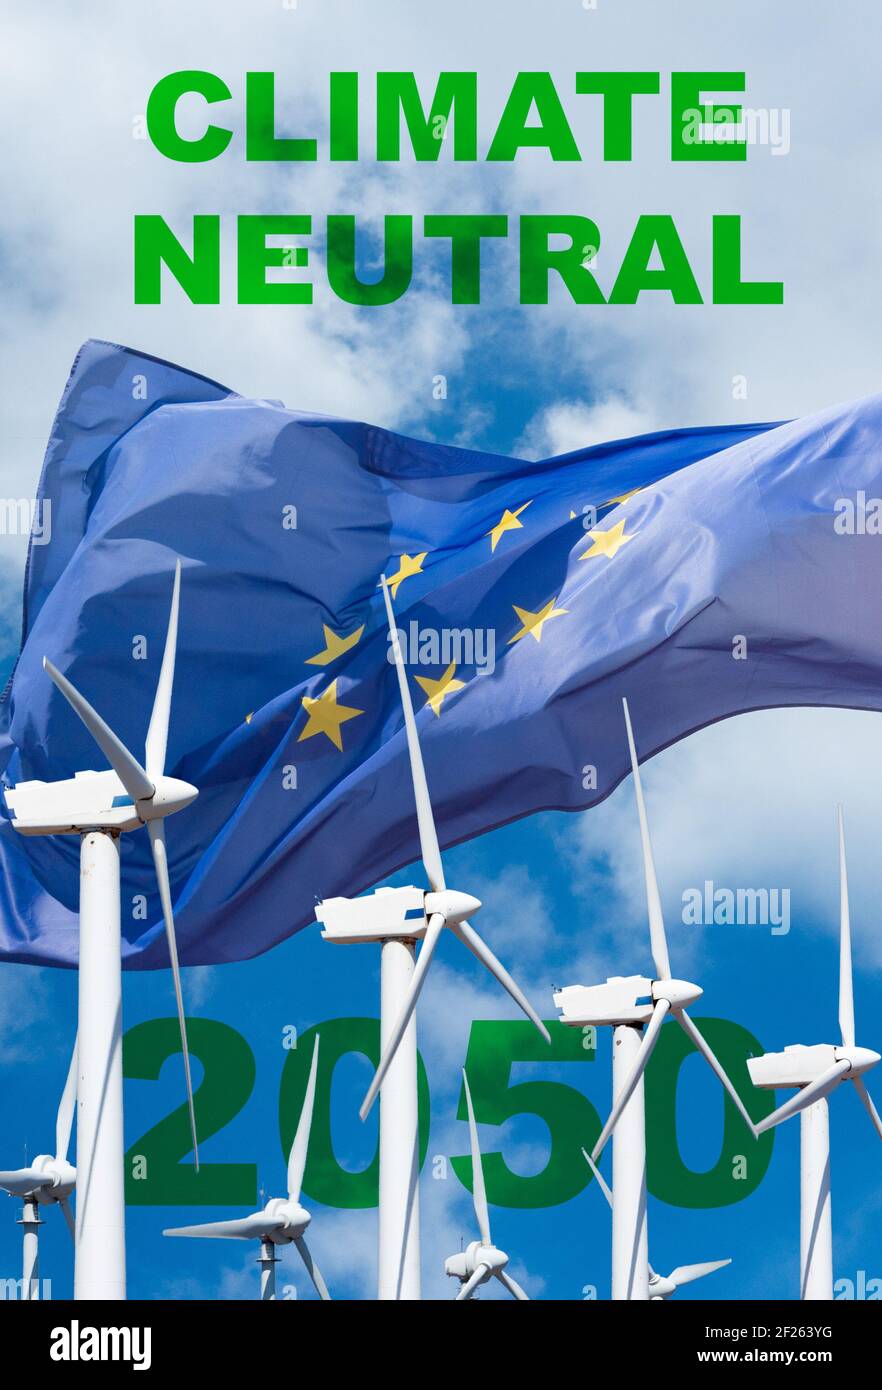 Climate neutral 2050 with EU flag and wind turbines. Net zero carbon emissions 2050, global warming, climate change... concept Stock Photo